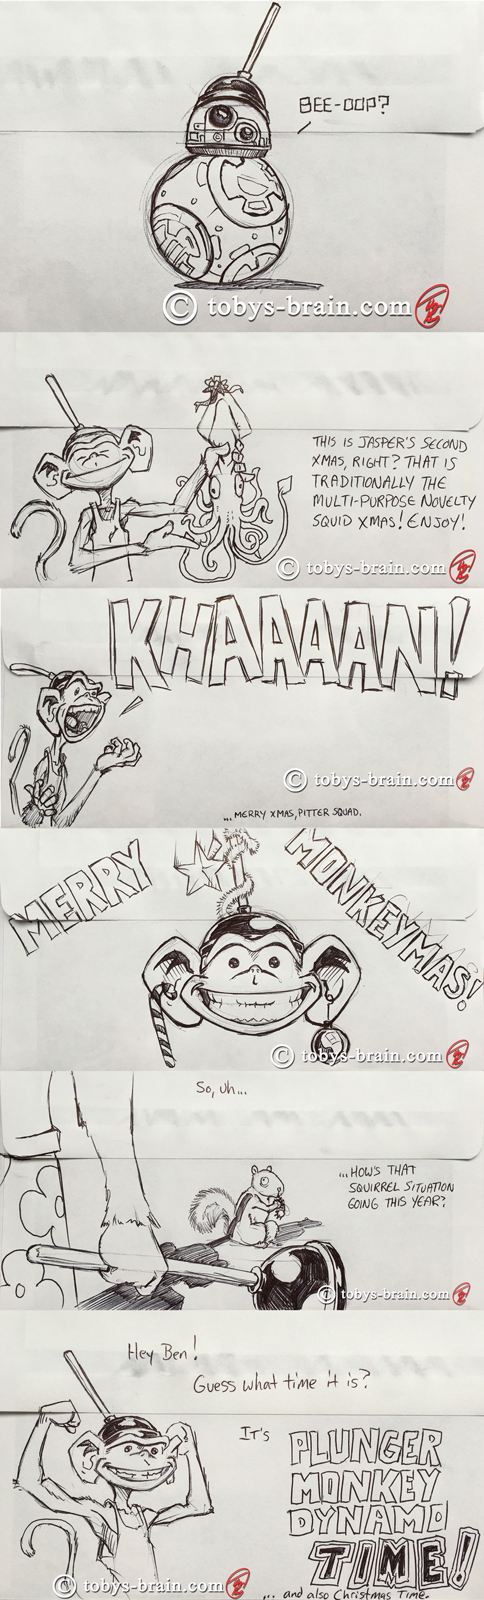 Plunger Monkey themed xmas card envelopes I draw for friends and family annually.